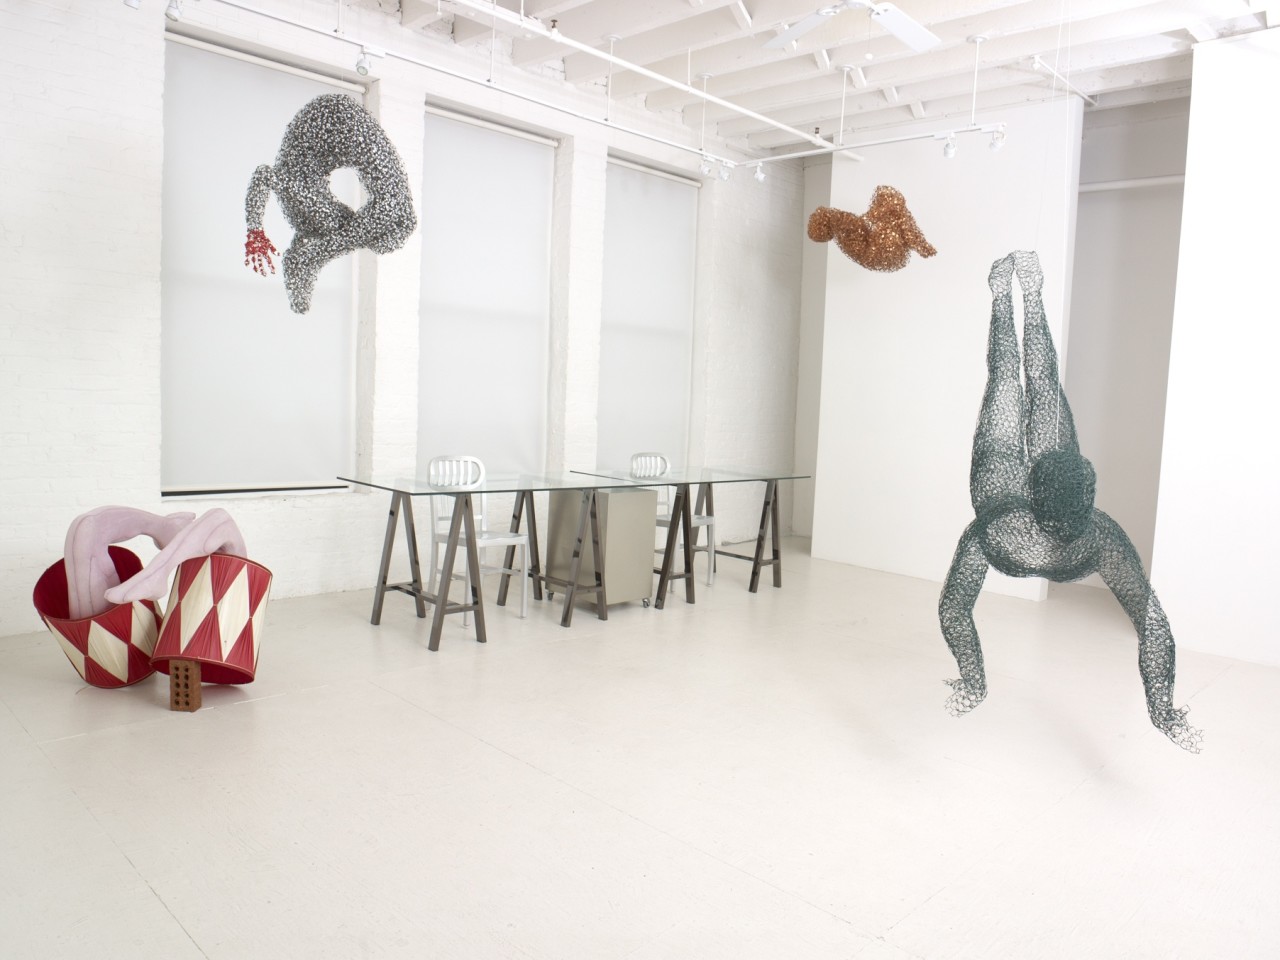 Installation view, Some Kind of Nature, sculpture by Julie Tremblay at 571 Projects NYC